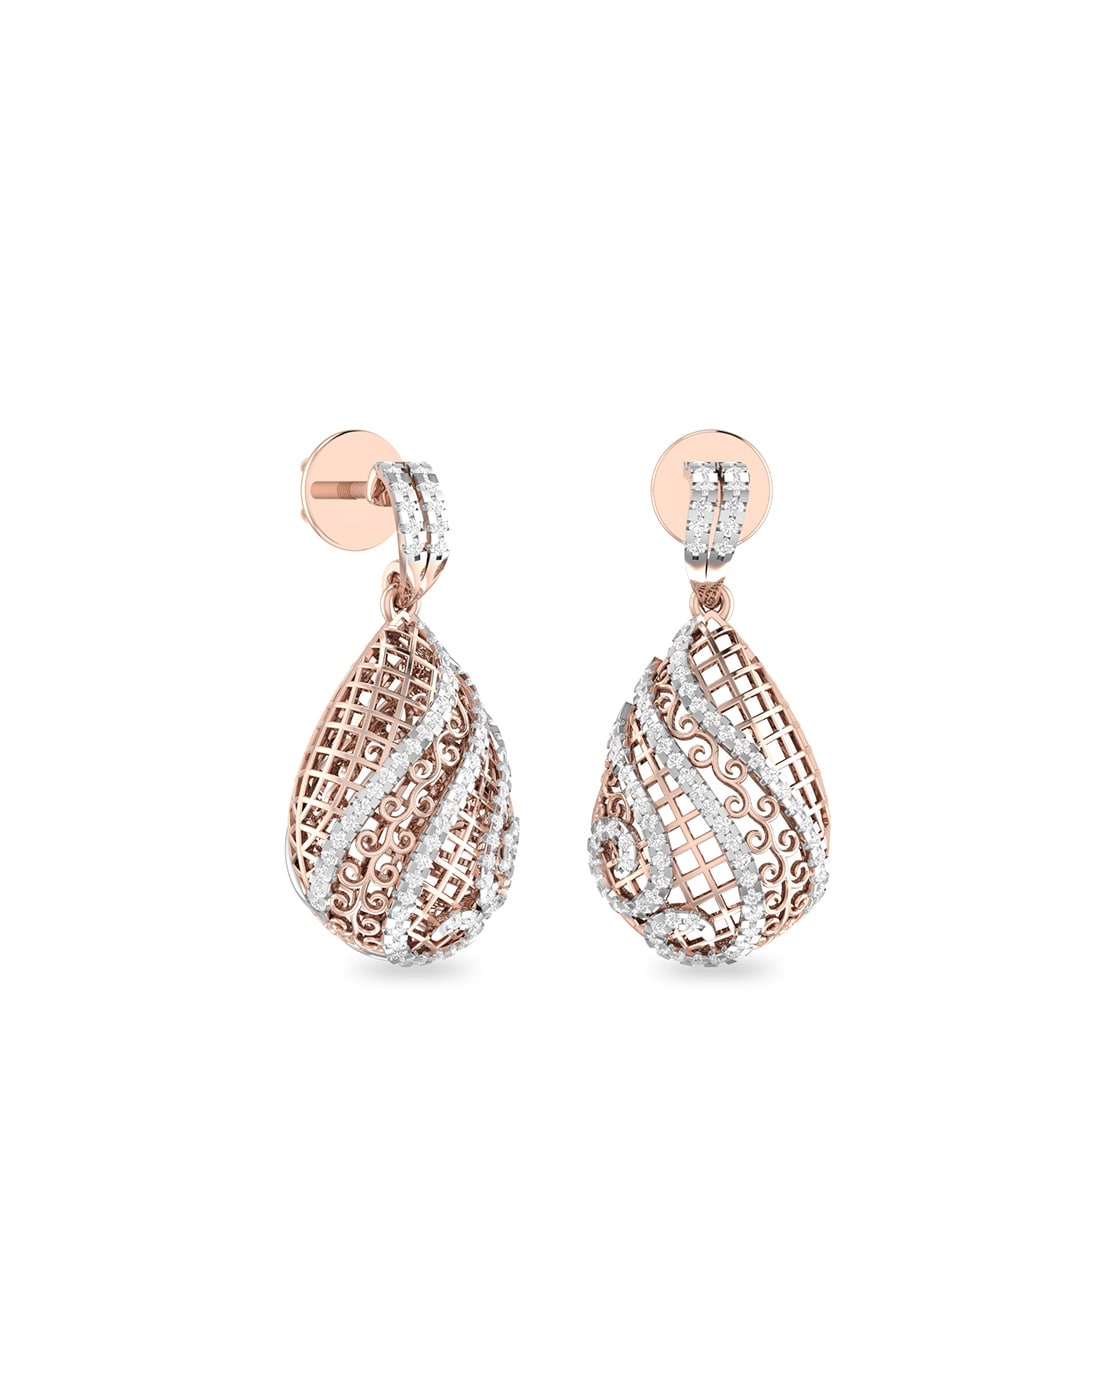 Buy SHAYA BY CARATLANE Fuchsia Dream Earrings in Rose Gold Plated 925  Silver | Shoppers Stop